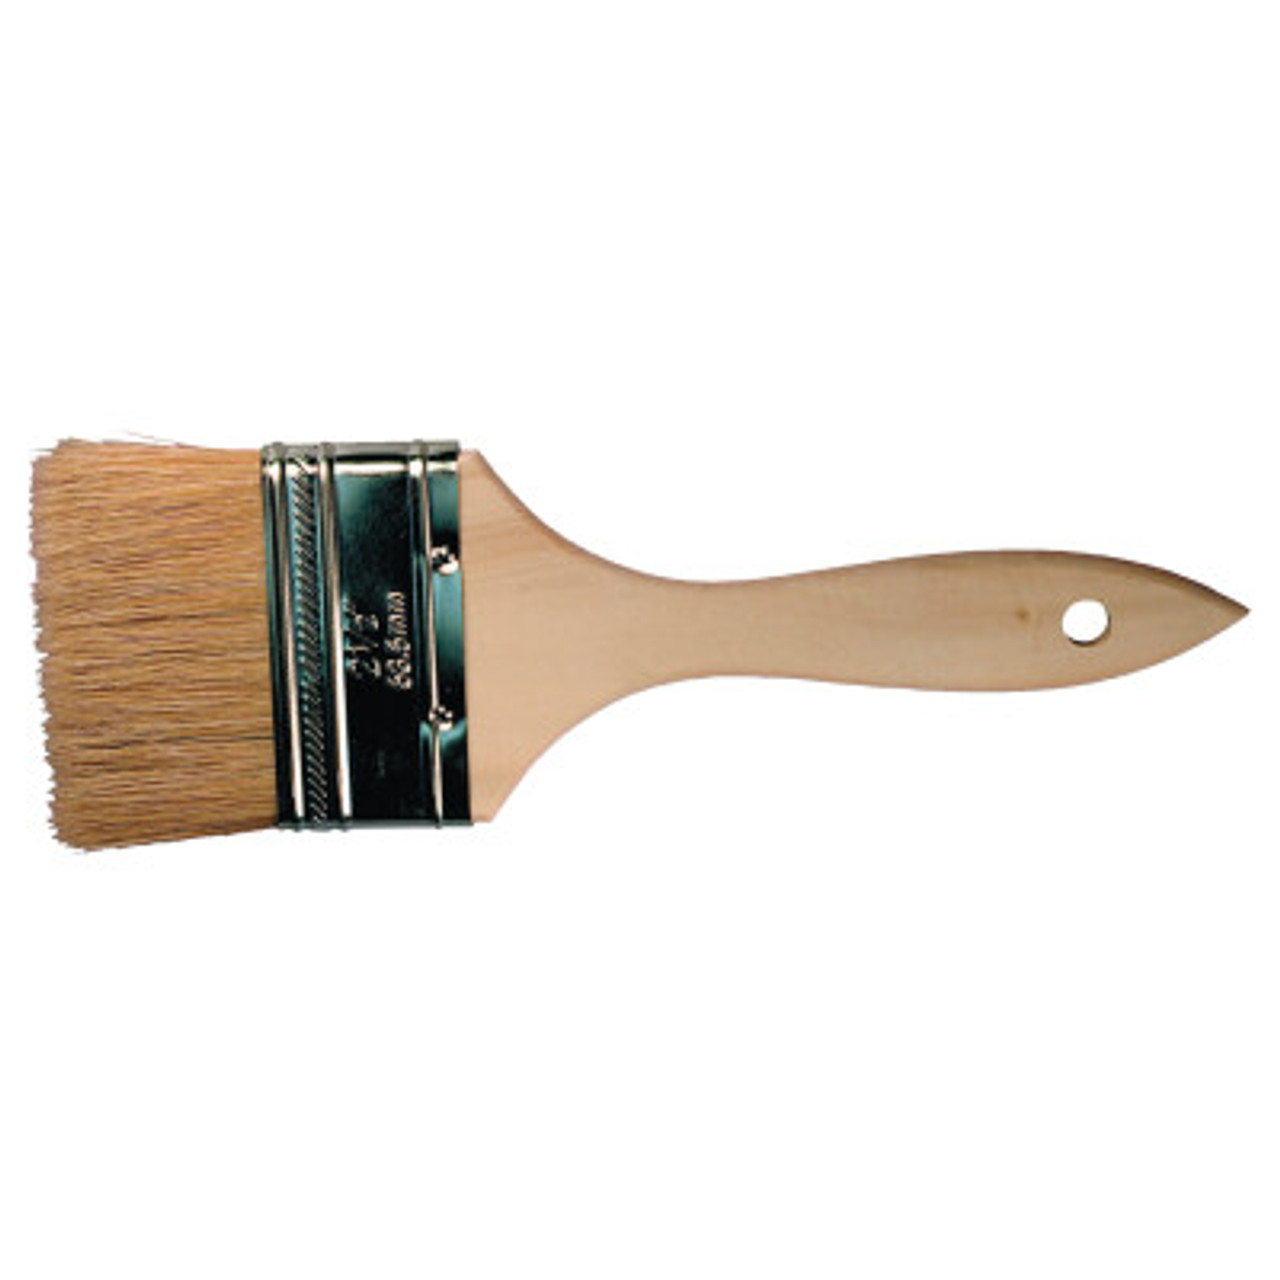 Pferd Chip Brushes, 5/16 in Thick, 1 1/2 in Trim, Wood Handle, 24 BX